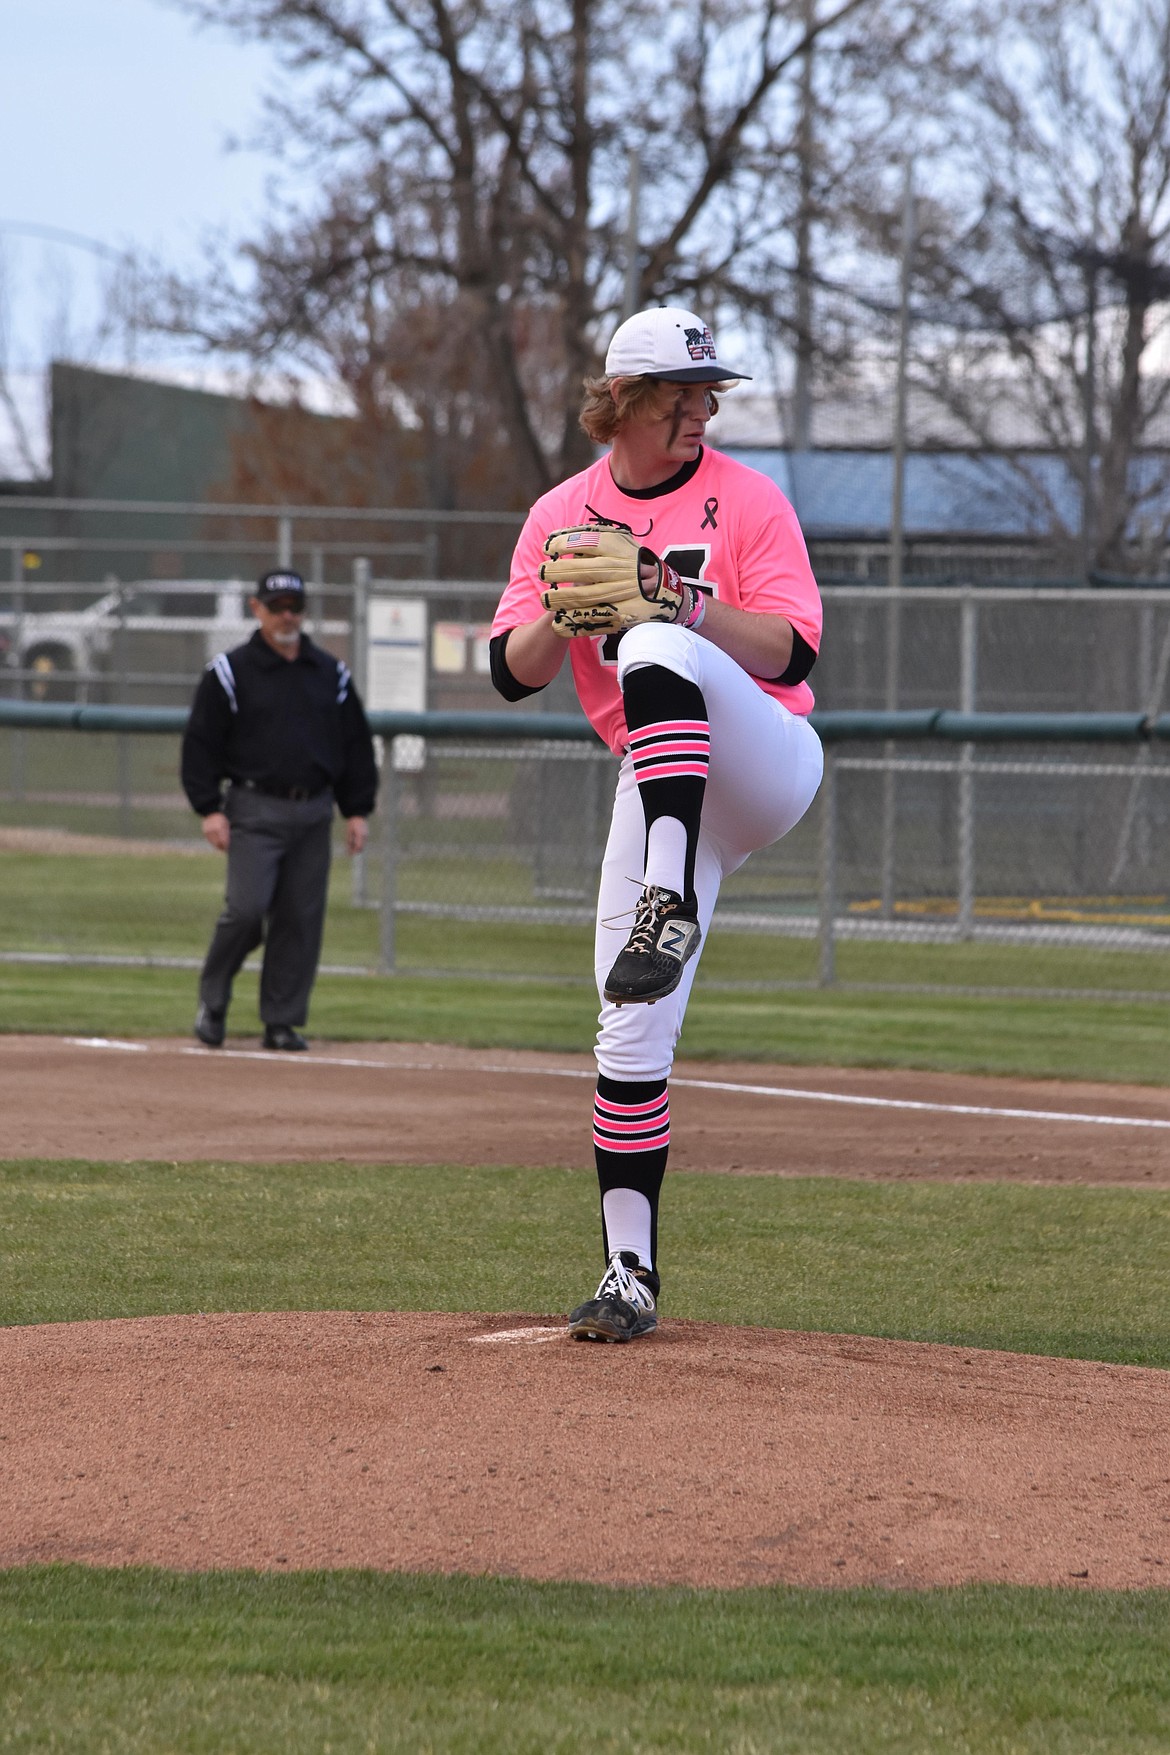 Moses Lake High School junior Michael Getzinger (28) pitched the first half of the game against Wenatchee High School on April 22. The team won that game in part thanks to Getzinger’s performance on the mound.